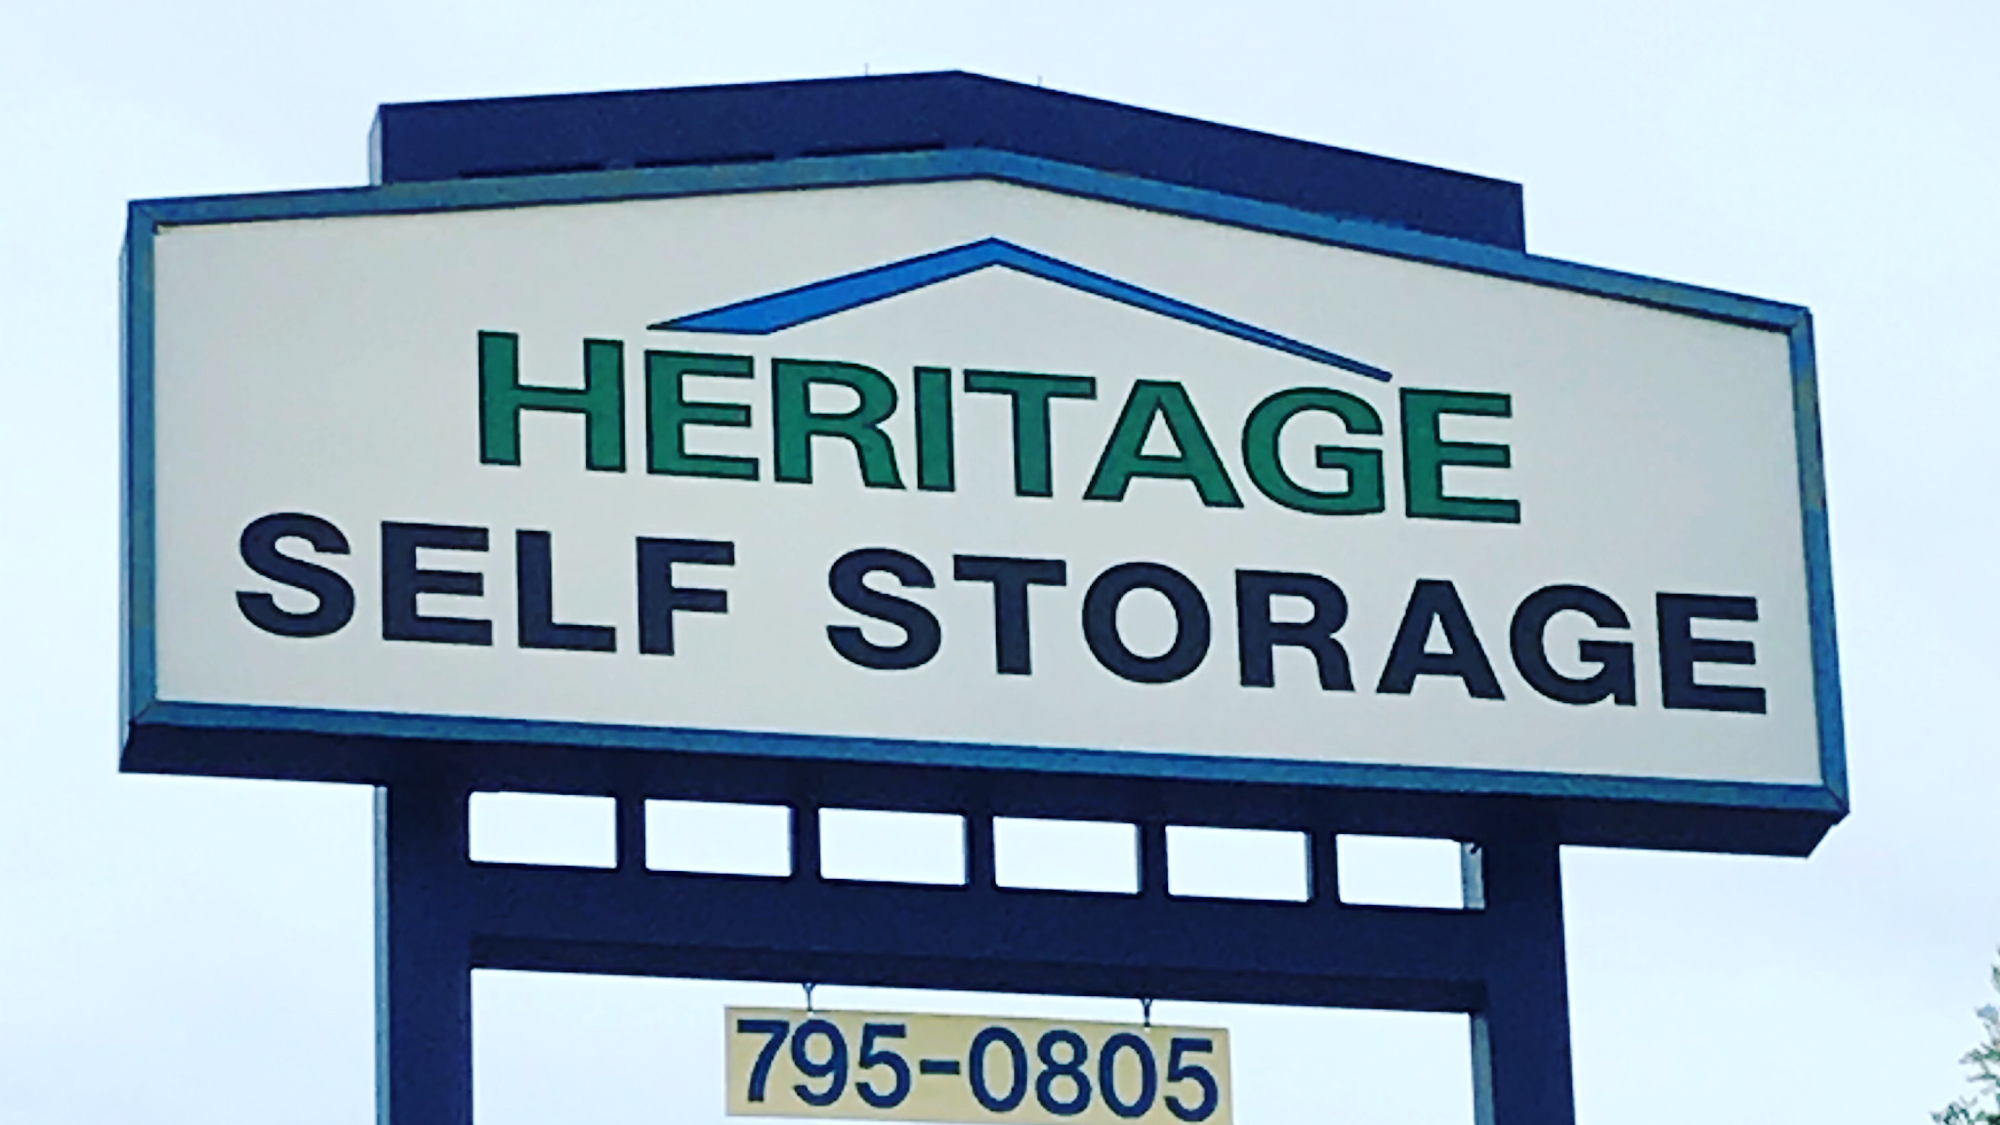 Heritage Self Storage Arnold with 24-Hour Access and Onsite Managers